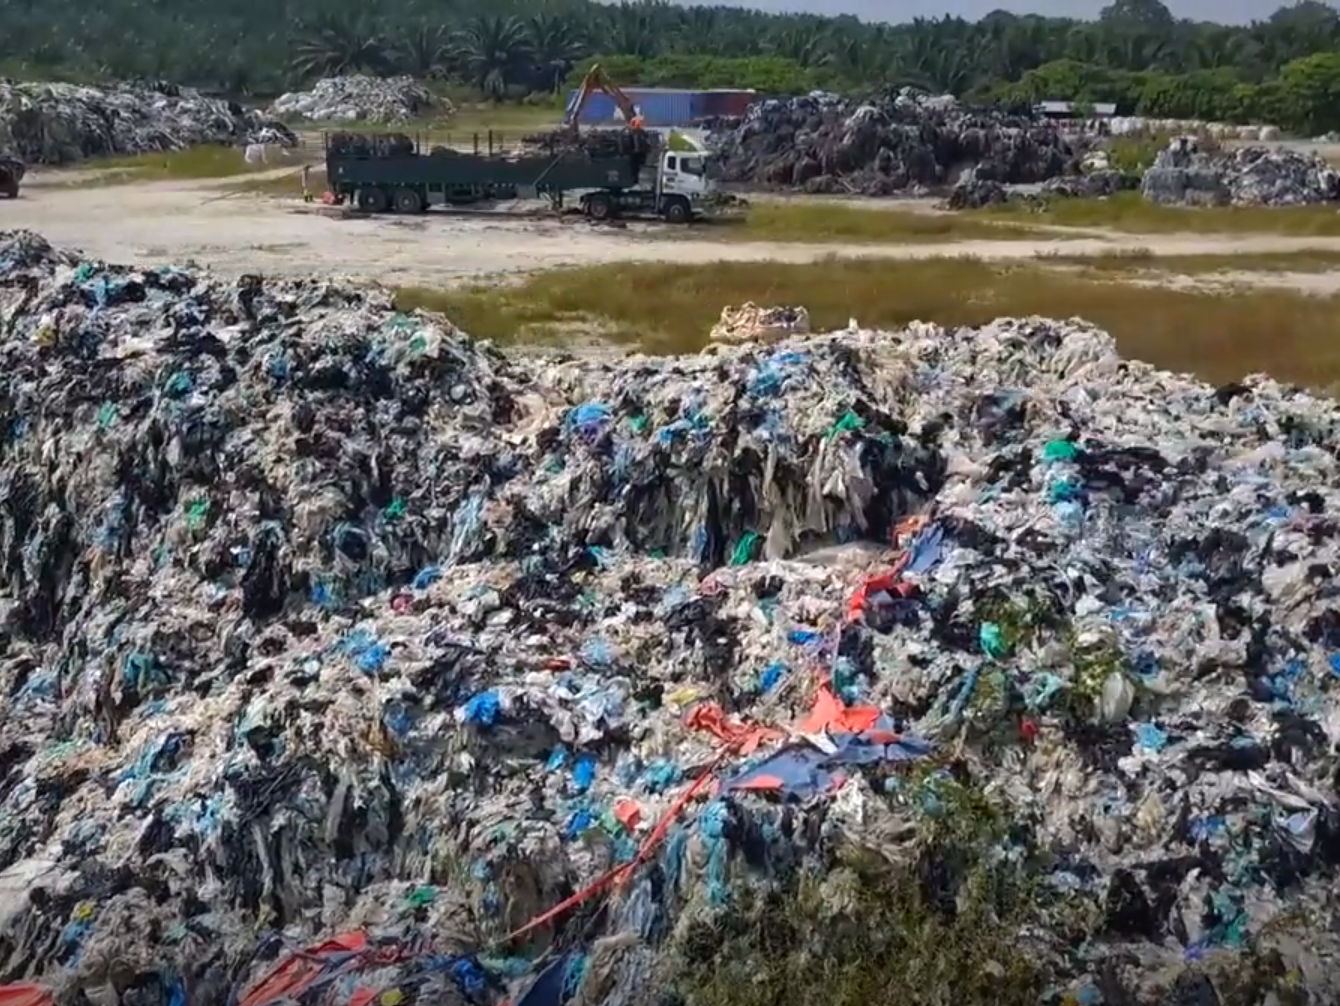 Massive Illegal Plastic Landfill Found In Penang With "6 Football Fields" Worth Of Trash Piled Two Stories High - WORLD OF BUZZ 1